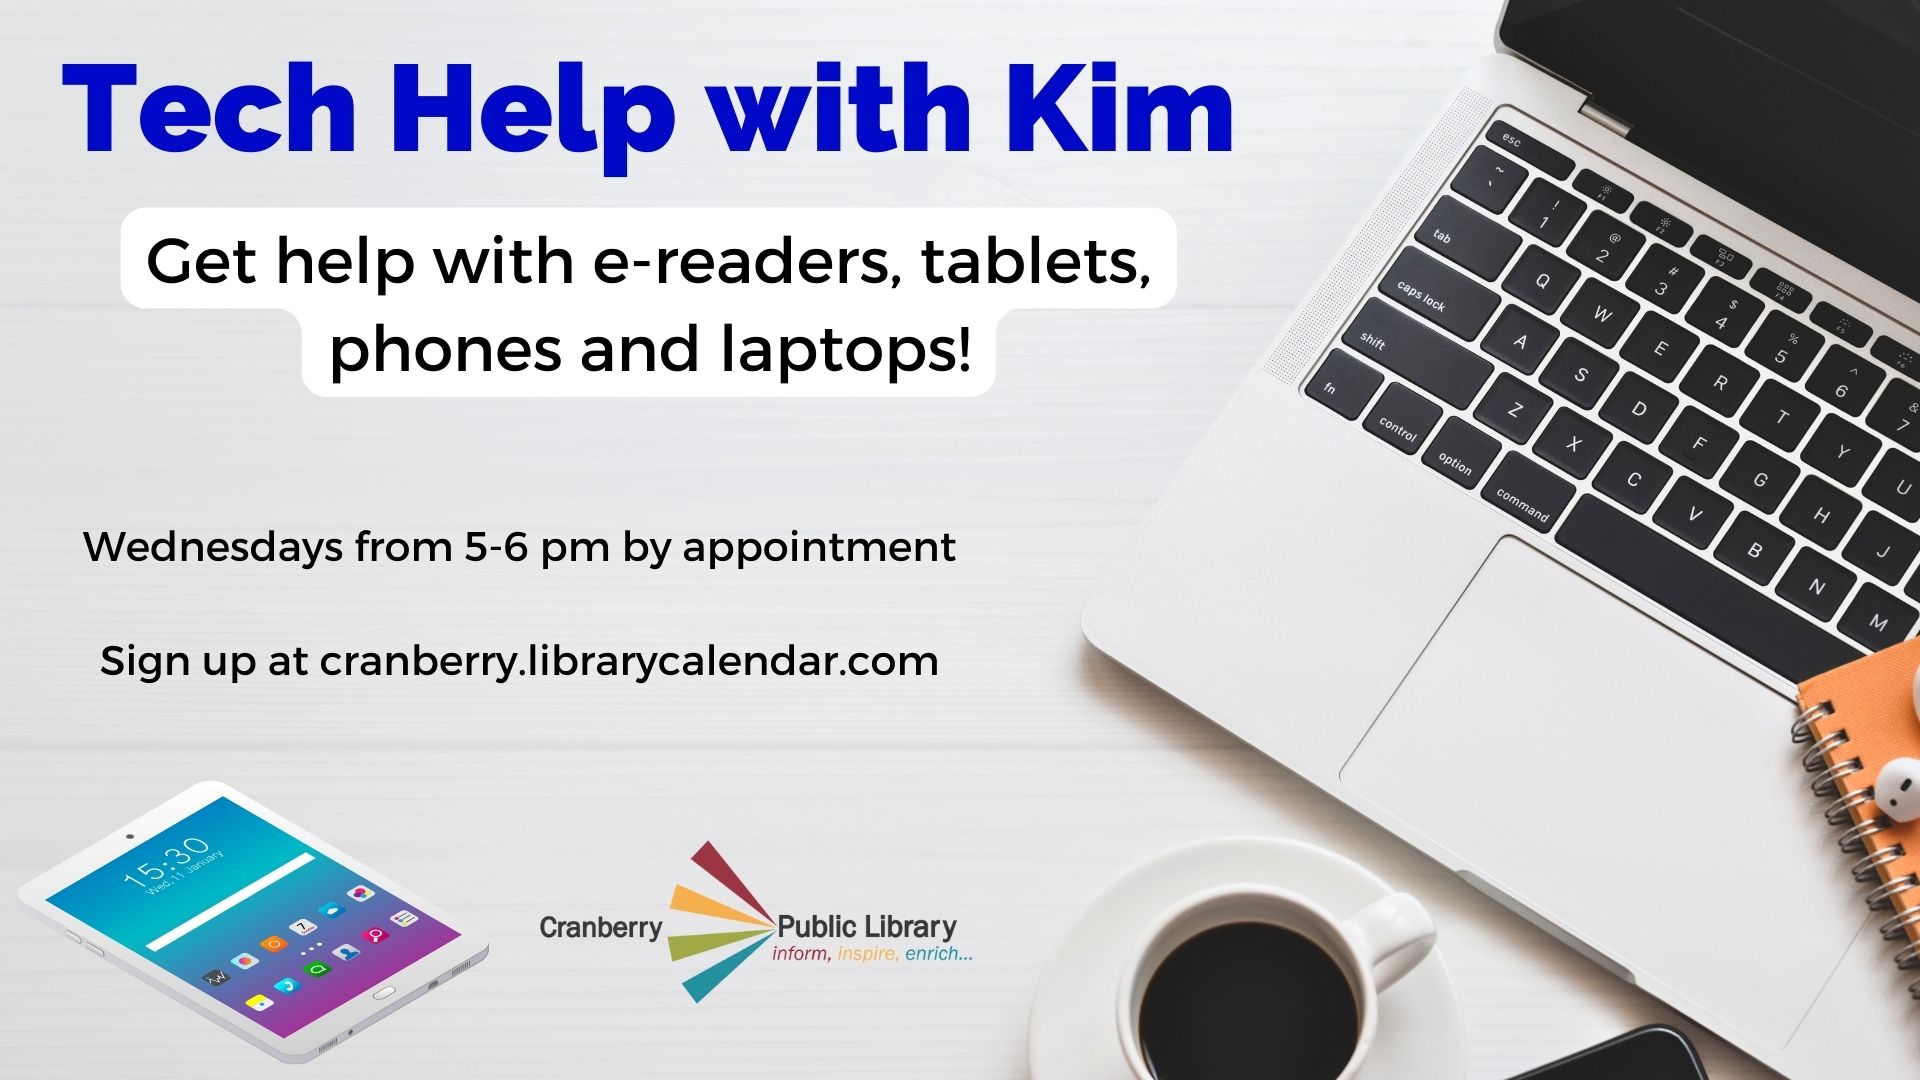 Flyer for Tech Help with Kim